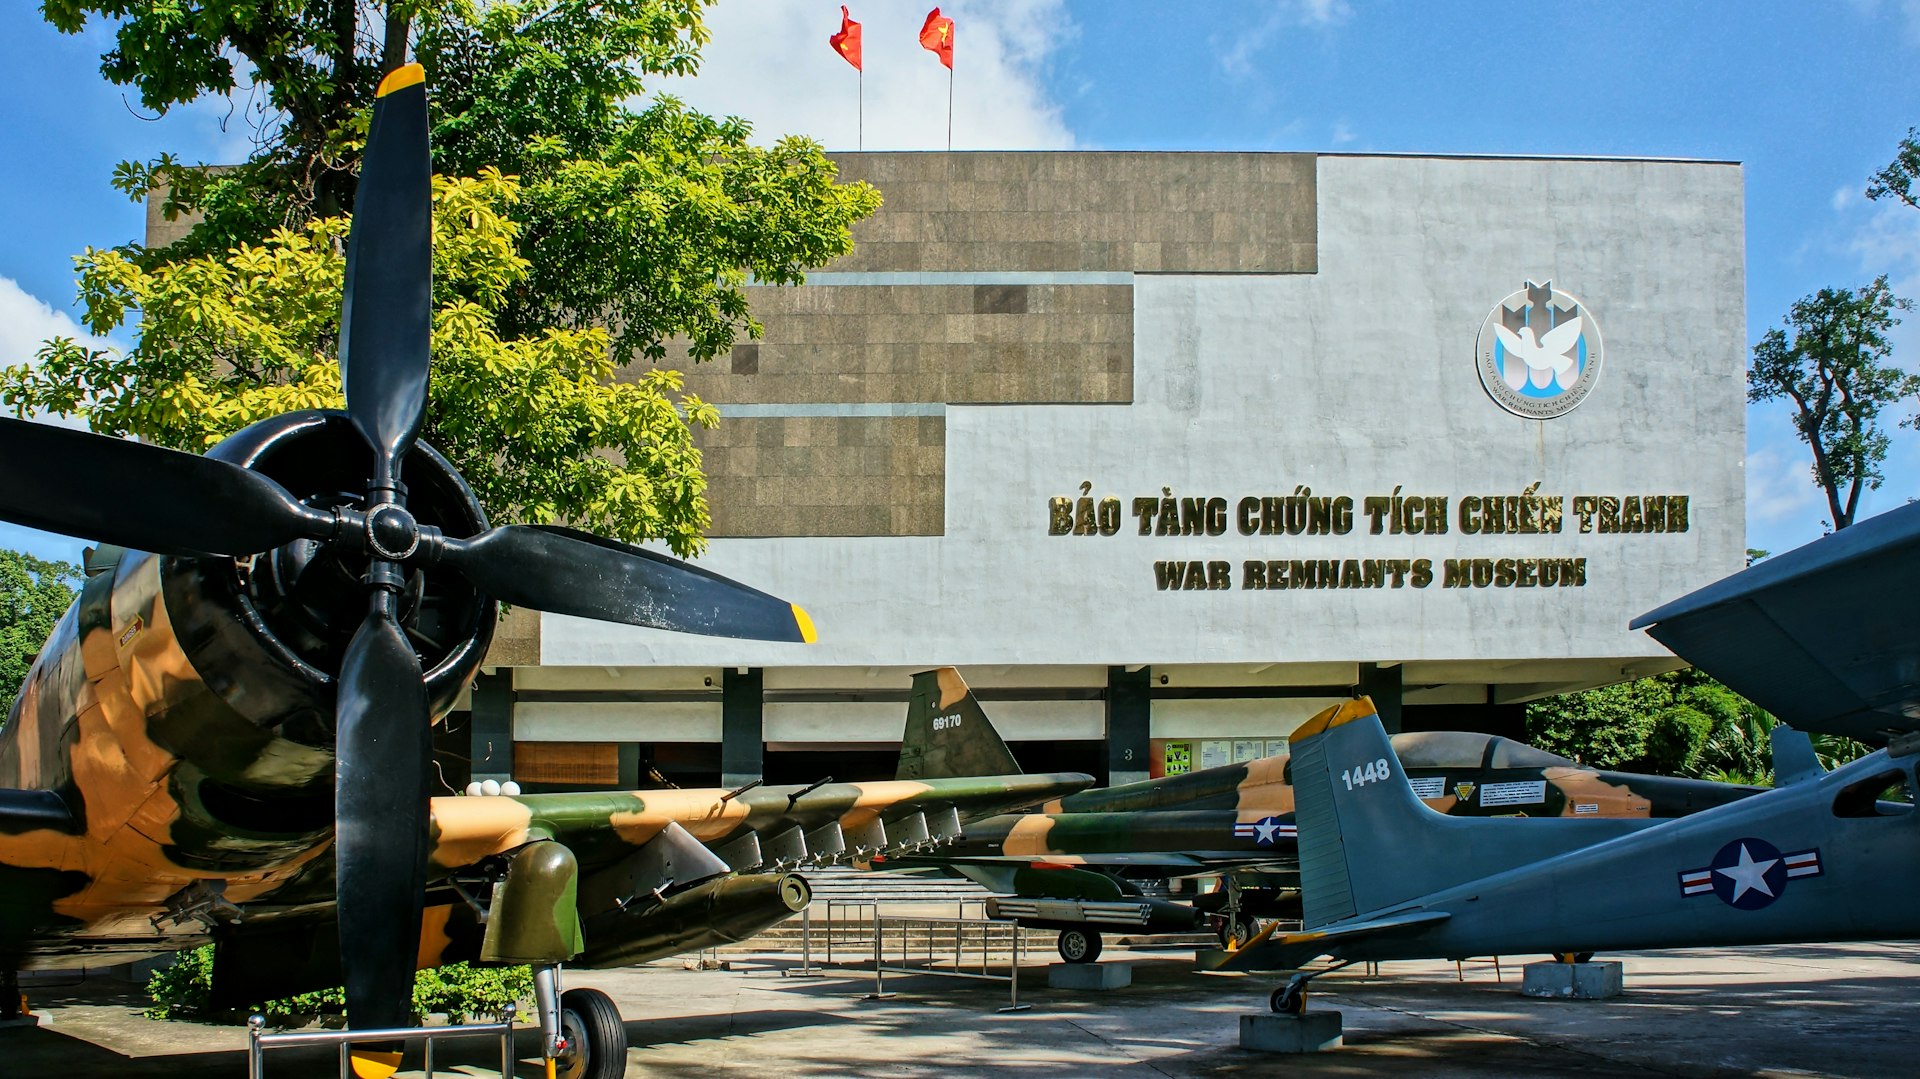 Several war planes sit outside of the War Remnants Museum in Ho Chi Minh City.